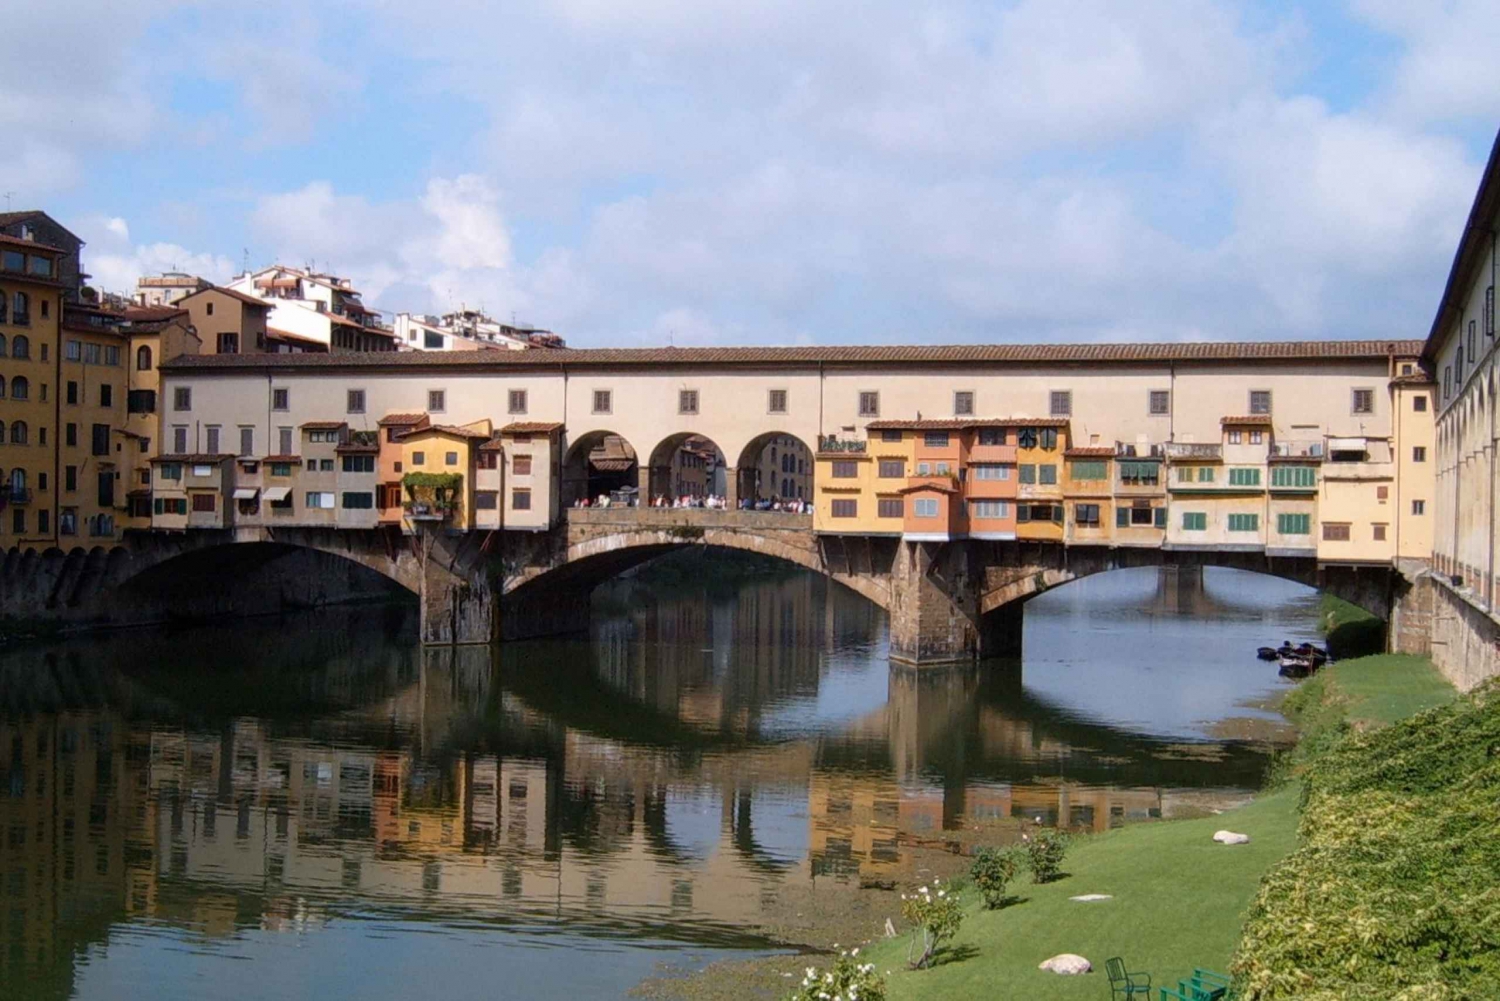 From Rome: Florence & Pisa Full-Day Tour